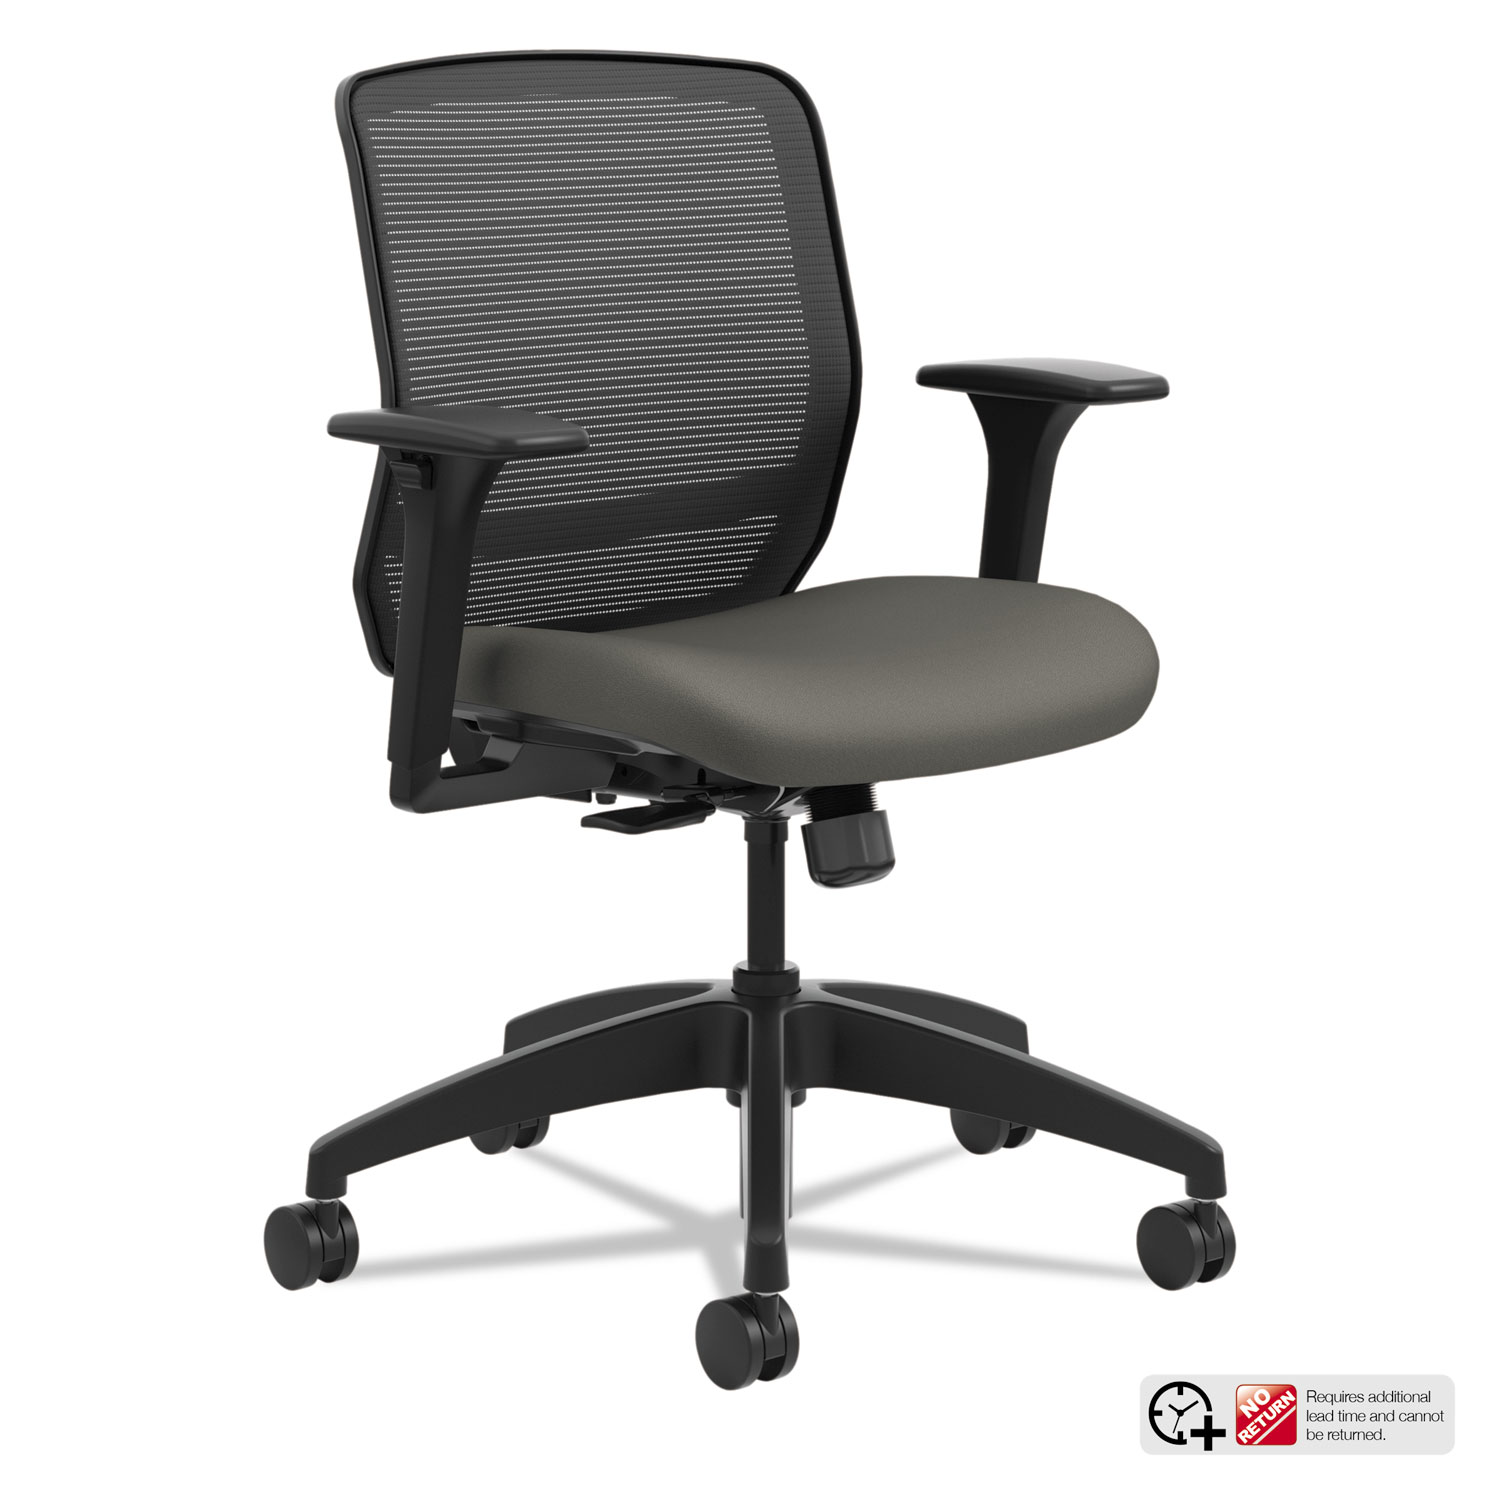  HON HQTMM.Y0.A.H.IM.CU19.SB Quotient Series Mesh Mid-Back Task Chair, Supports up to 300 lbs., Iron Ore Seat/Black Back, Black Base (HONQTMMY1ACU19) 